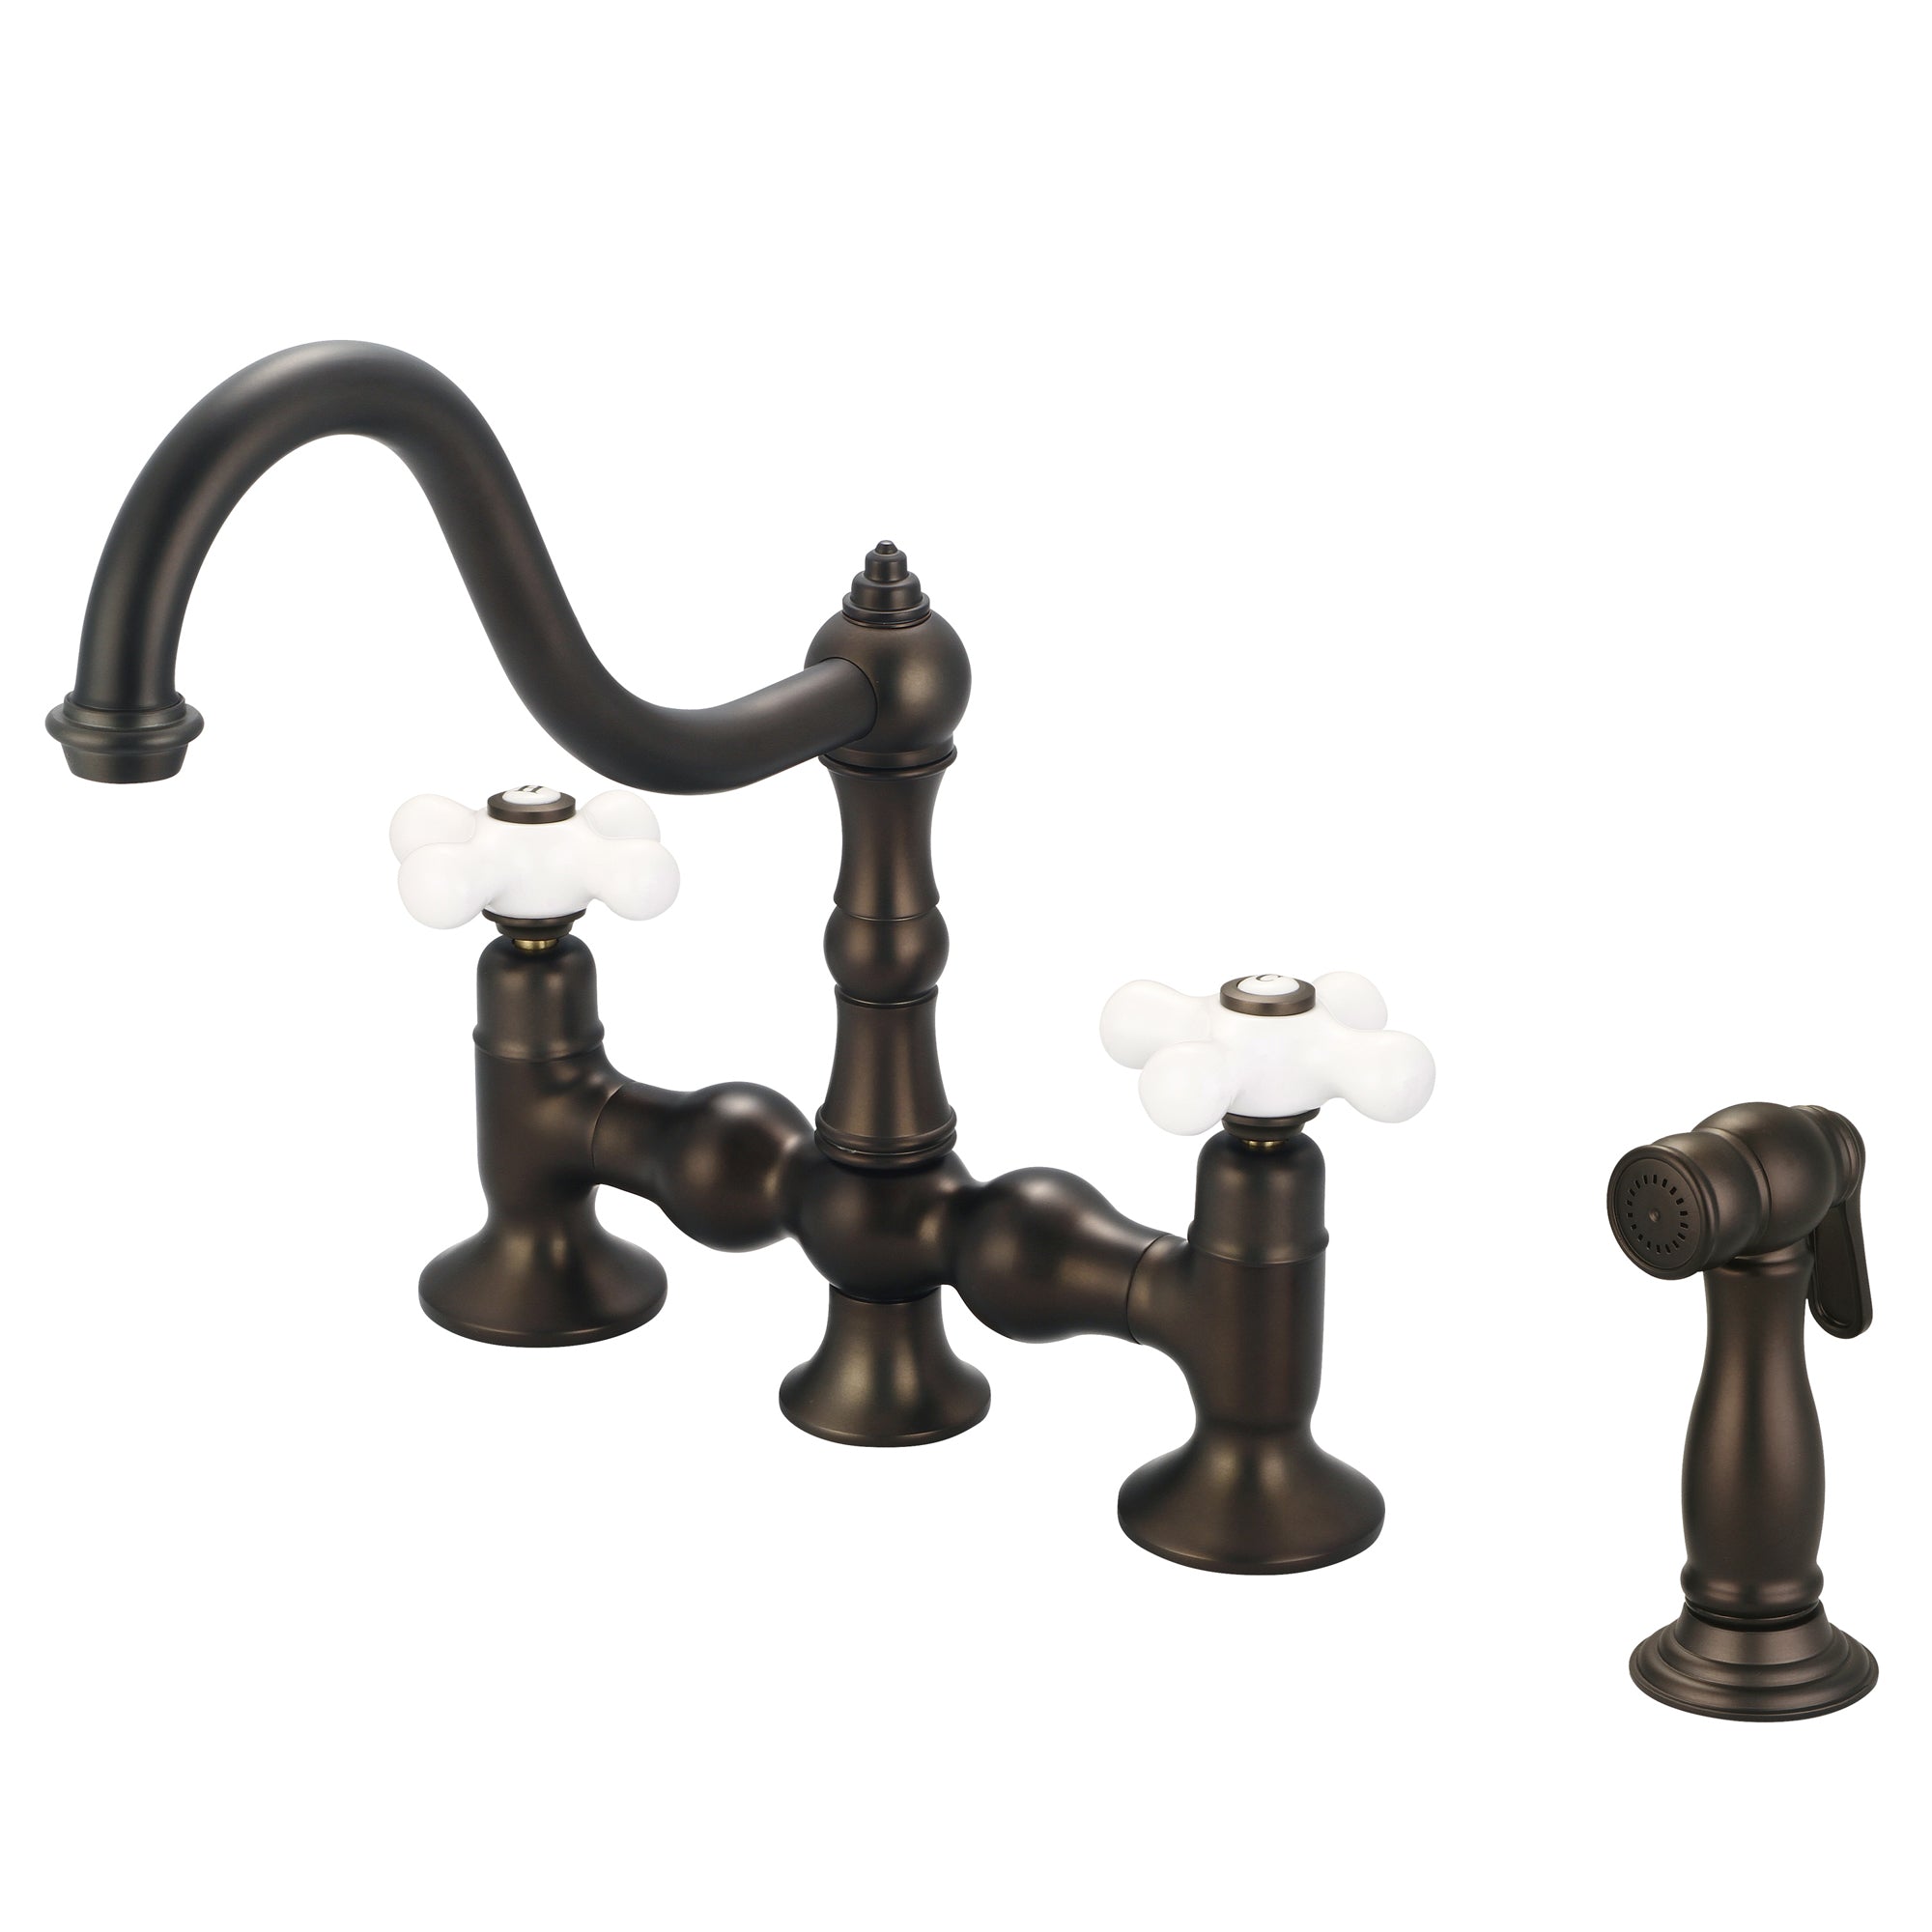 Water Creation | Bridge Style Kitchen Faucet With Side Spray To Match in Oil-rubbed Bronze Finish Finish With Porcelain Cross Handles, Hot And Cold Labels Included | F5-0010-03-PX